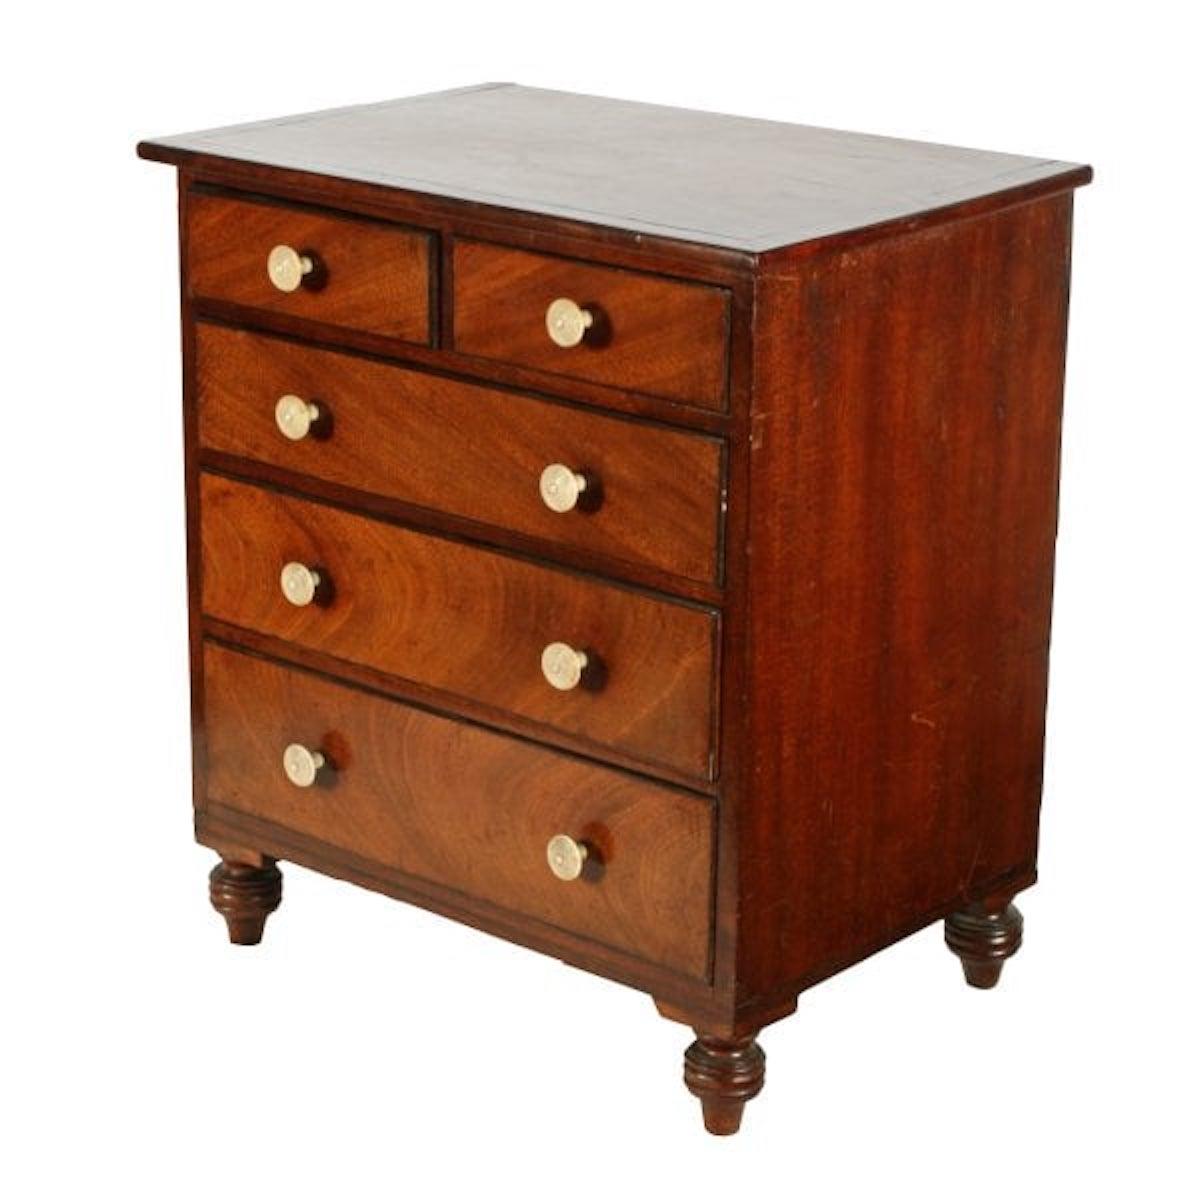 English Regency Miniature Chest of Drawers, 19th Century